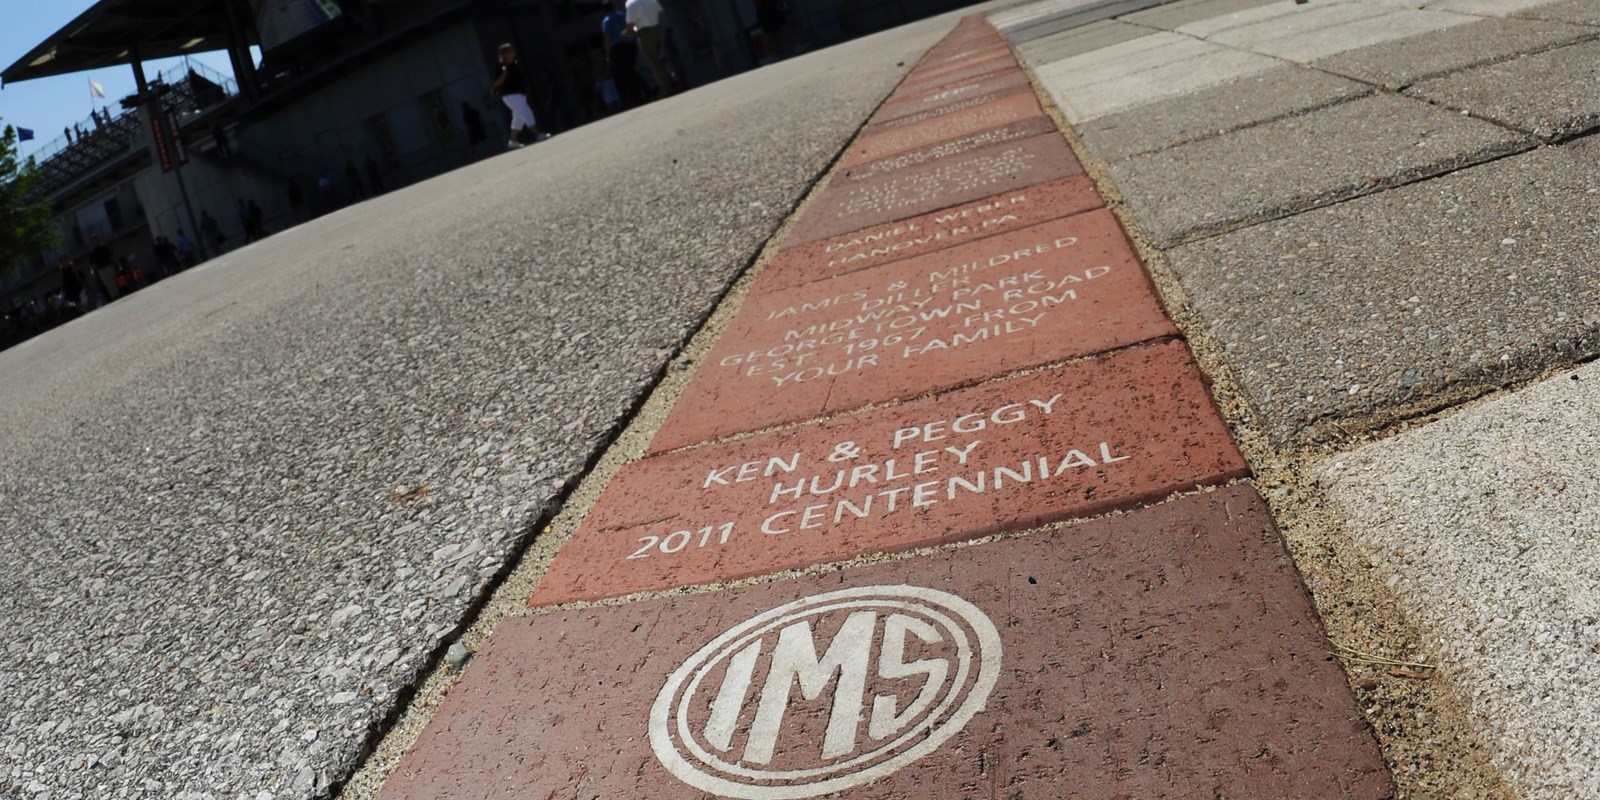 IMS Commemorative Brick Program now offers official Wing &amp; Wheel logo